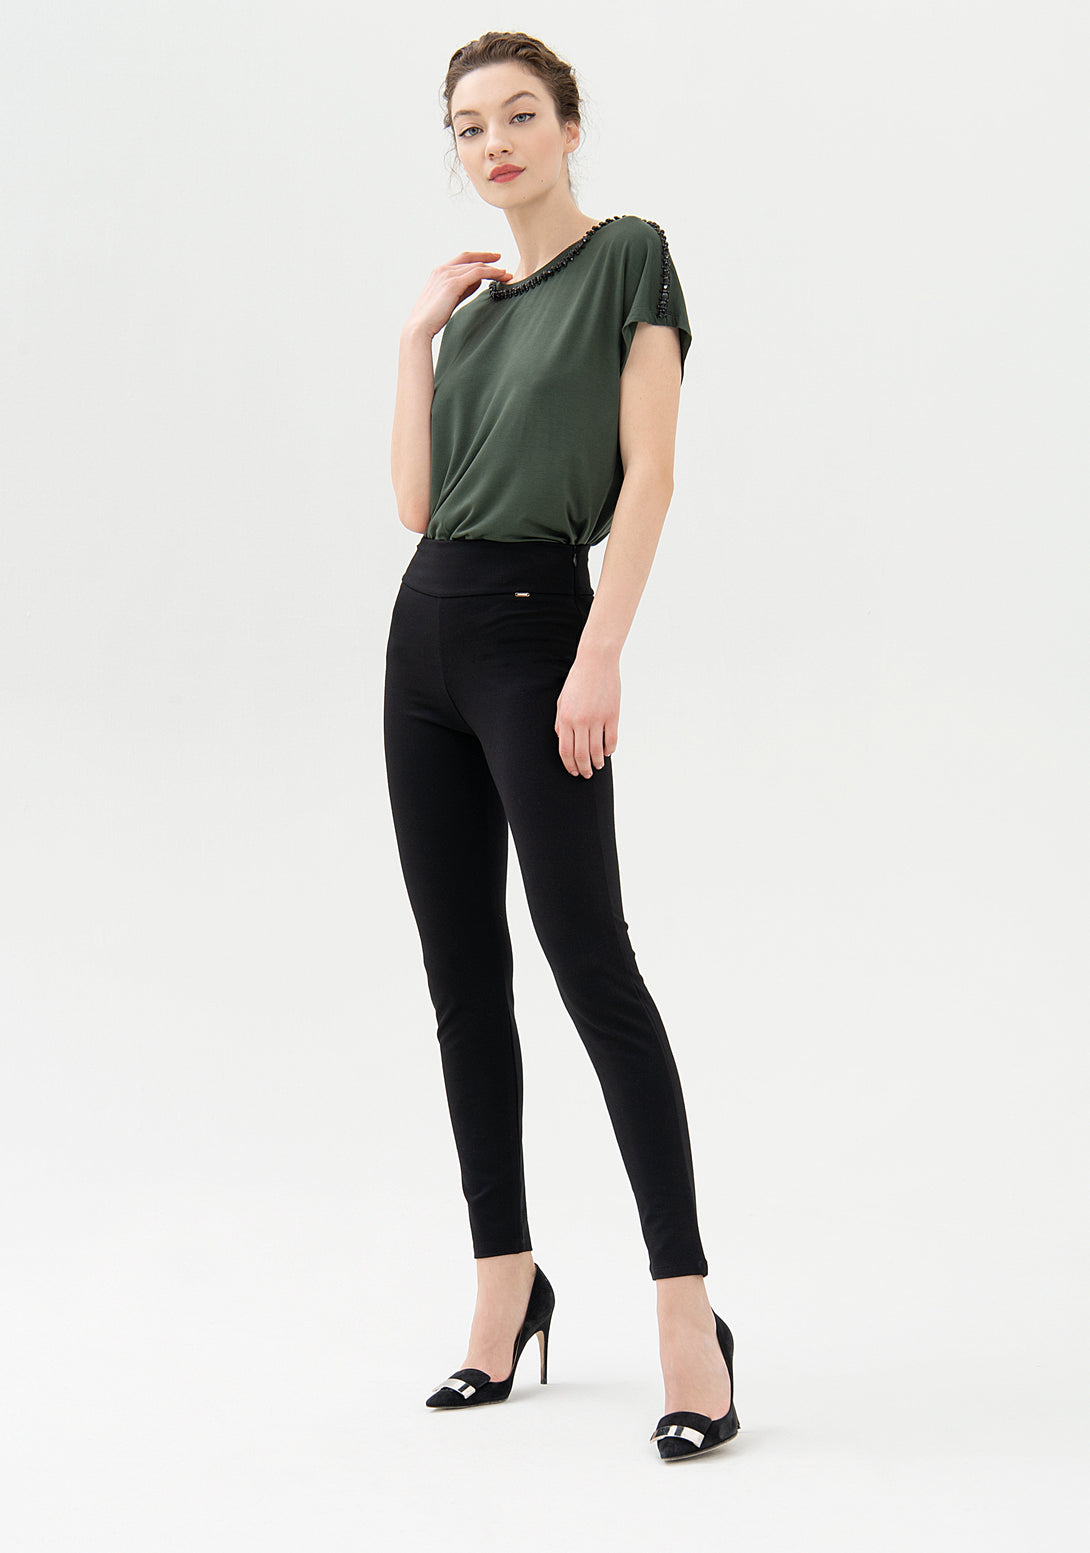 Leggings skinny fit with high waist